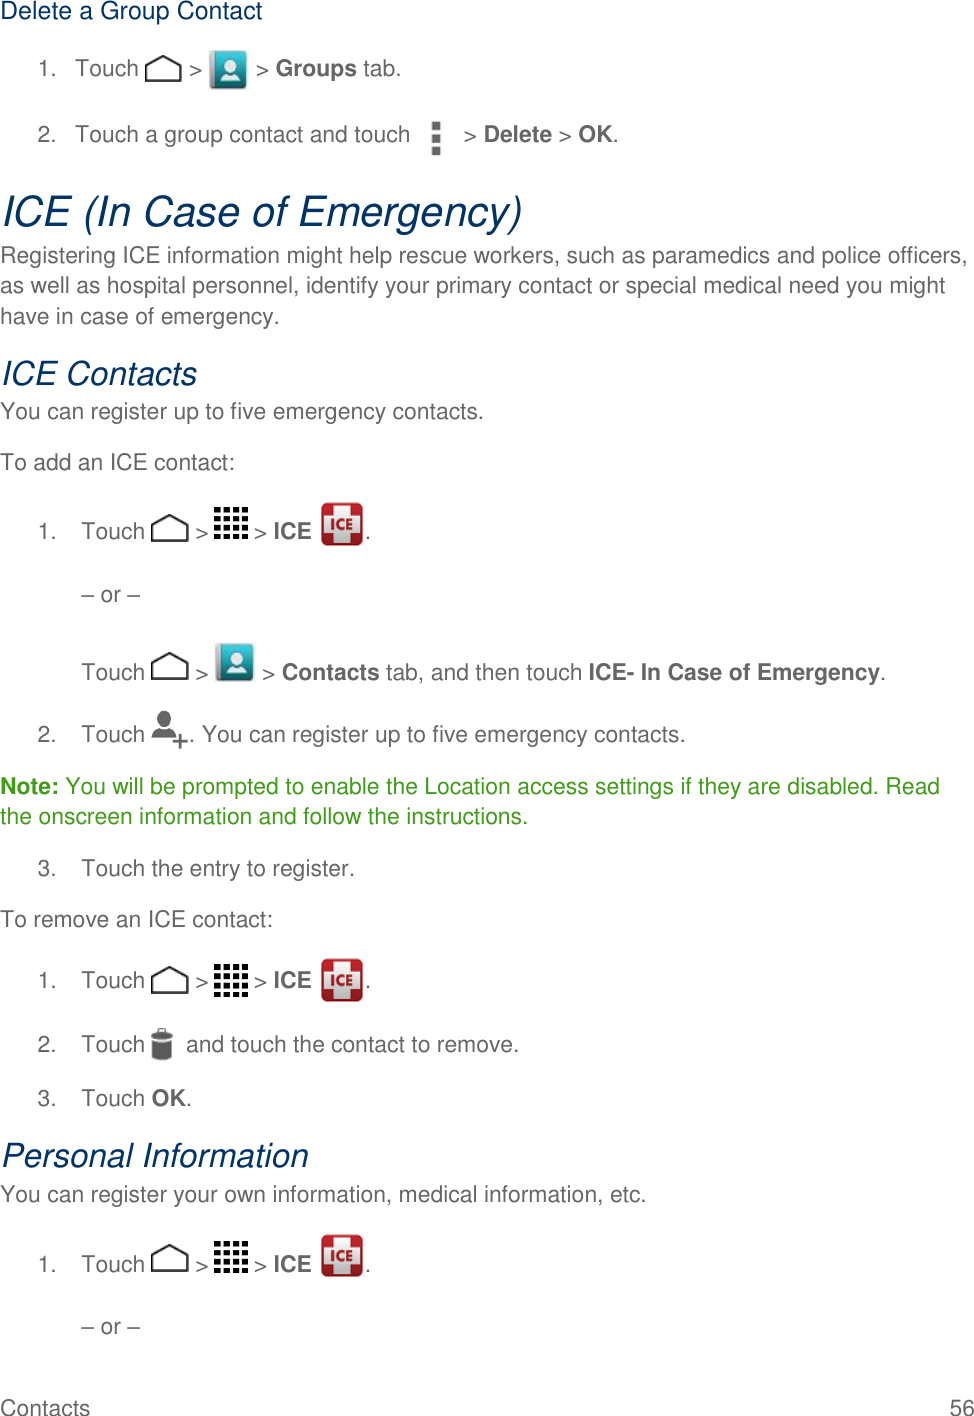 Contacts    56 Delete a Group Contact 1.  Touch   &gt;   &gt; Groups tab. 2.  Touch a group contact and touch  &gt; Delete &gt; OK. ICE (In Case of Emergency) Registering ICE information might help rescue workers, such as paramedics and police officers, as well as hospital personnel, identify your primary contact or special medical need you might have in case of emergency. ICE Contacts You can register up to five emergency contacts. To add an ICE contact: 1.  Touch   &gt;   &gt; ICE  .   – or –   Touch   &gt;   &gt; Contacts tab, and then touch ICE- In Case of Emergency. 2.  Touch  . You can register up to five emergency contacts. Note: You will be prompted to enable the Location access settings if they are disabled. Read the onscreen information and follow the instructions. 3.  Touch the entry to register. To remove an ICE contact: 1.  Touch   &gt;   &gt; ICE  . 2.  Touch    and touch the contact to remove. 3.  Touch OK. Personal Information  You can register your own information, medical information, etc. 1.  Touch   &gt;   &gt; ICE  .   – or –  